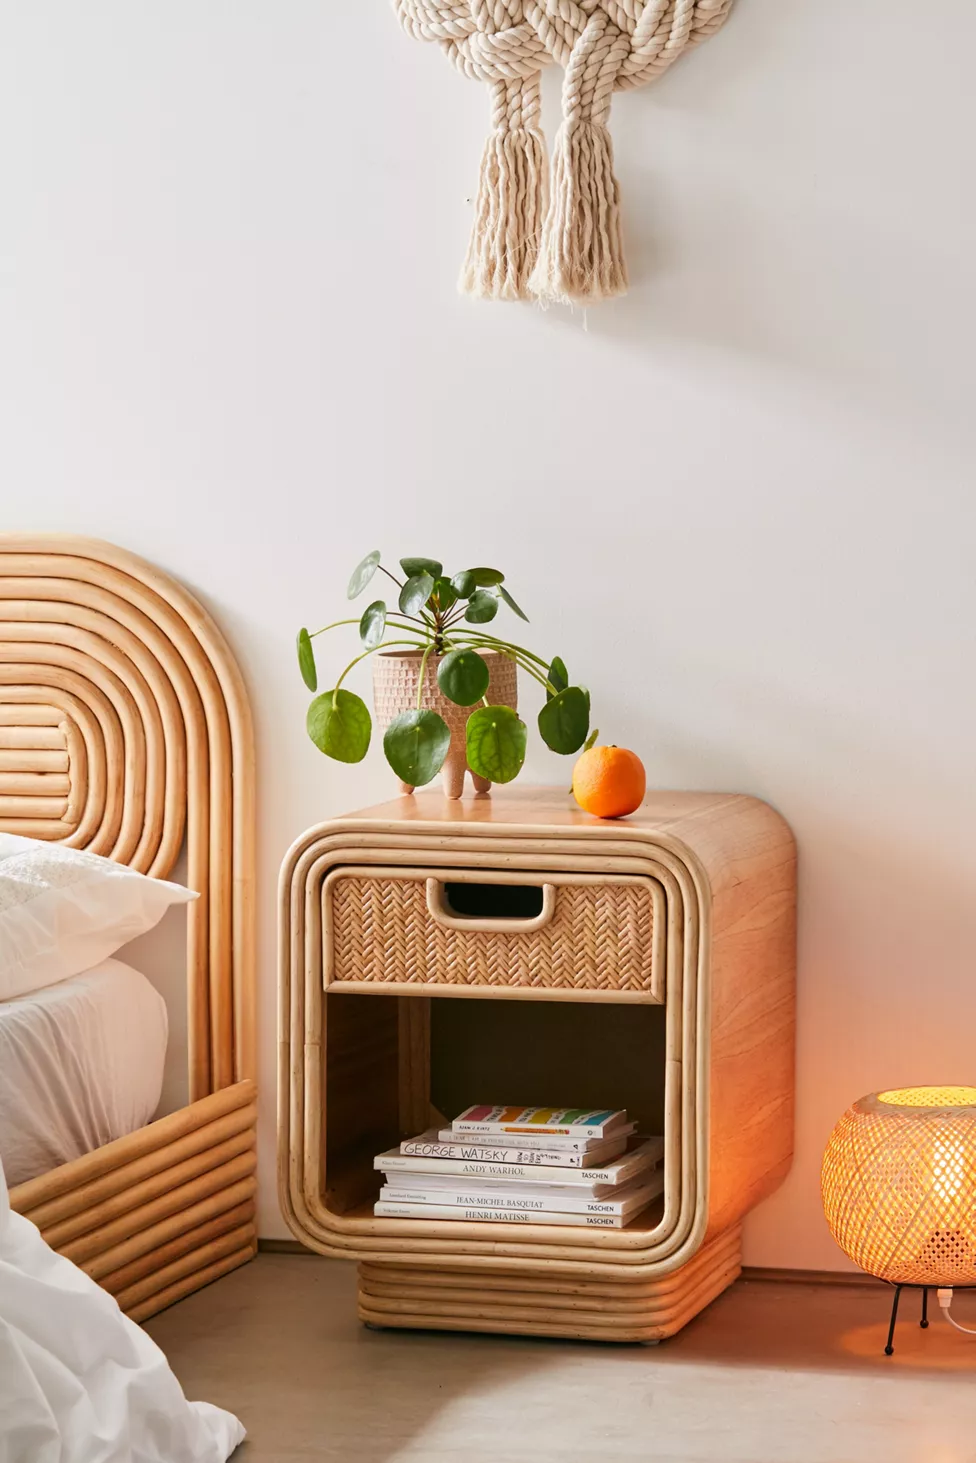 Take Your Bedroom to the ‘70s with This Nightstand